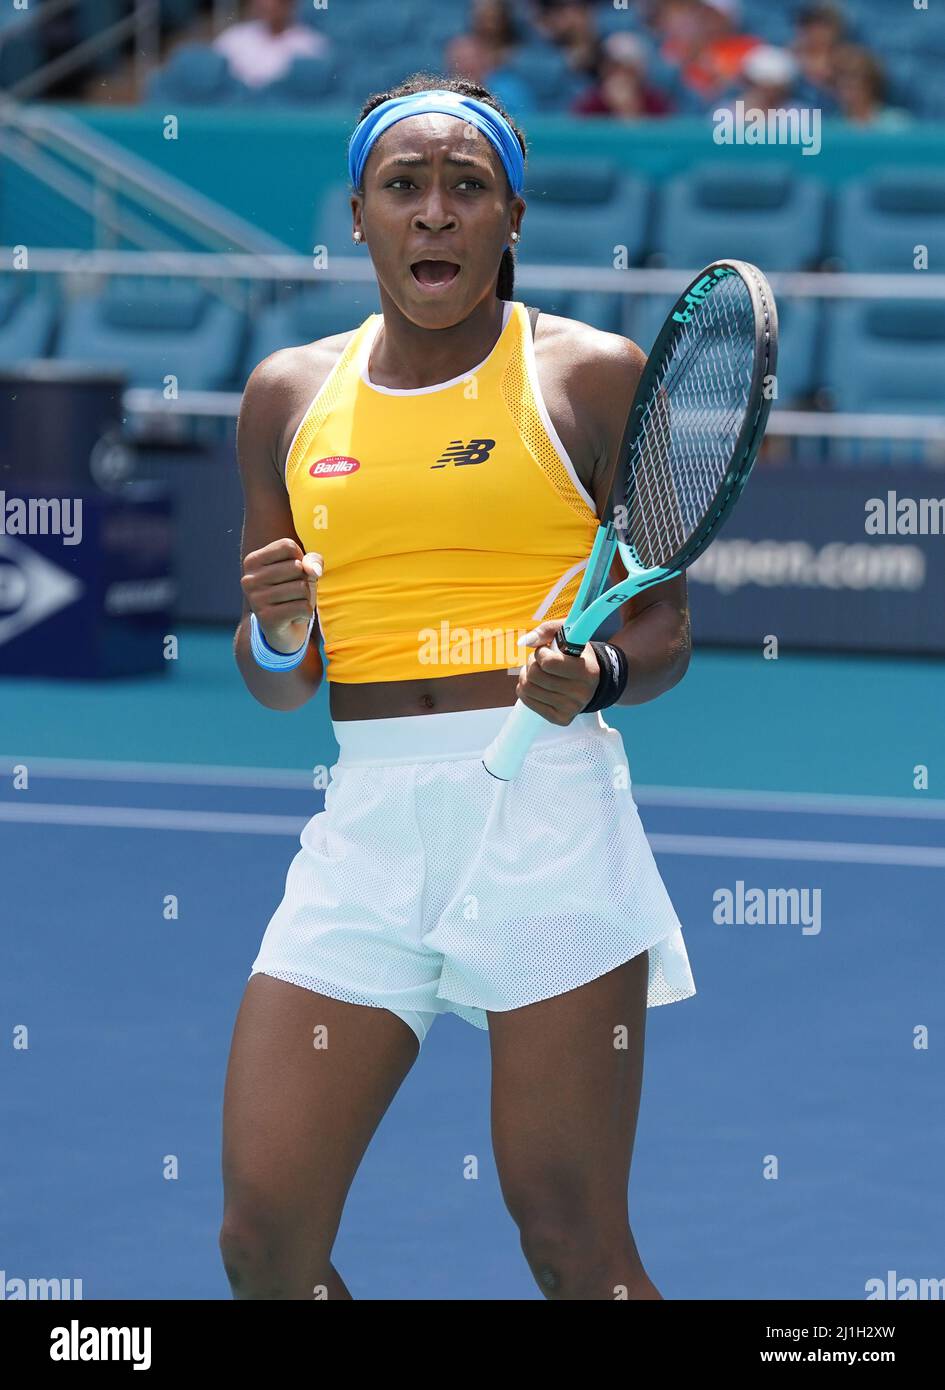 Miami Gardens FL, USA. 25th Mar, 2022. Coco Gauff Vs Wang Qiang during The Miami Open at Hard Rock Stadium on March 25, 2022 in Miami Gardens, Florida. Credit: Mpi04/Media Punch/Alamy Live News Stock Photo